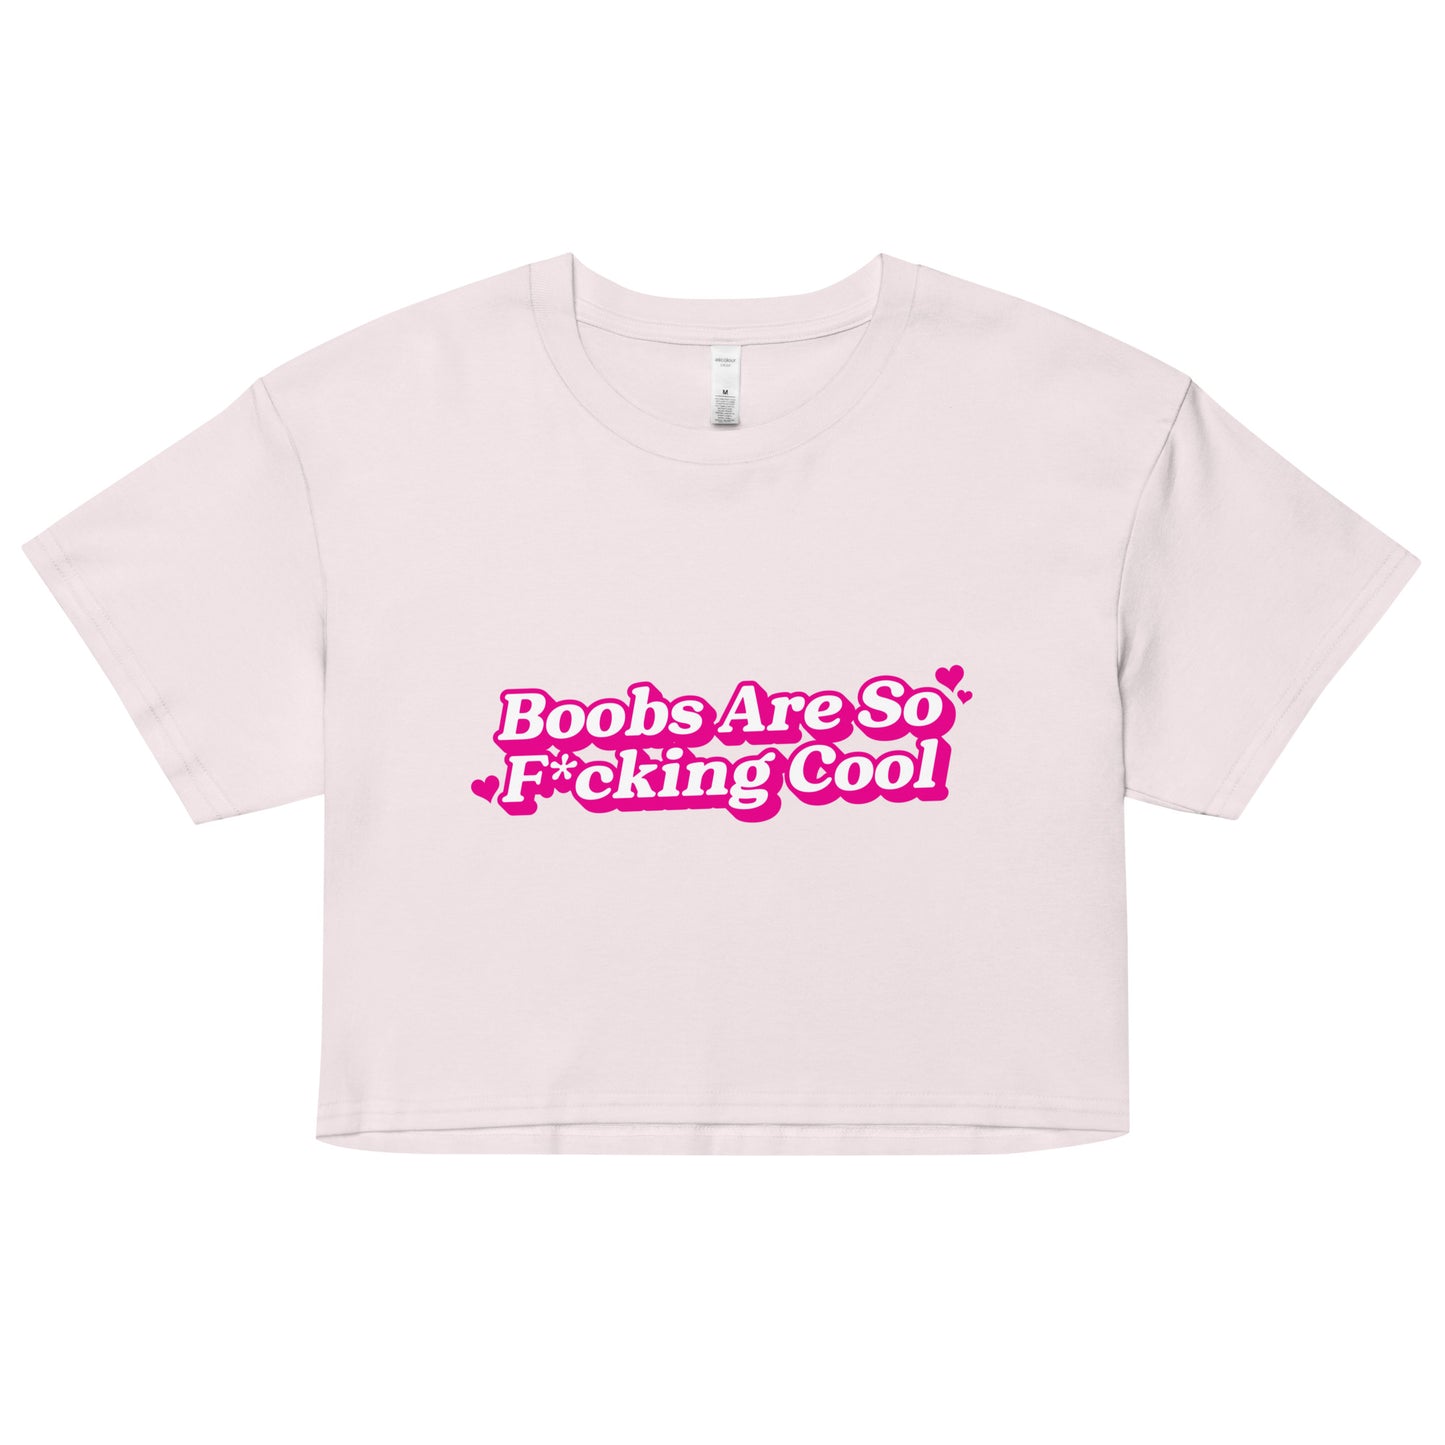 Boobs Are F*cking Cool (Pink) Women’s crop top